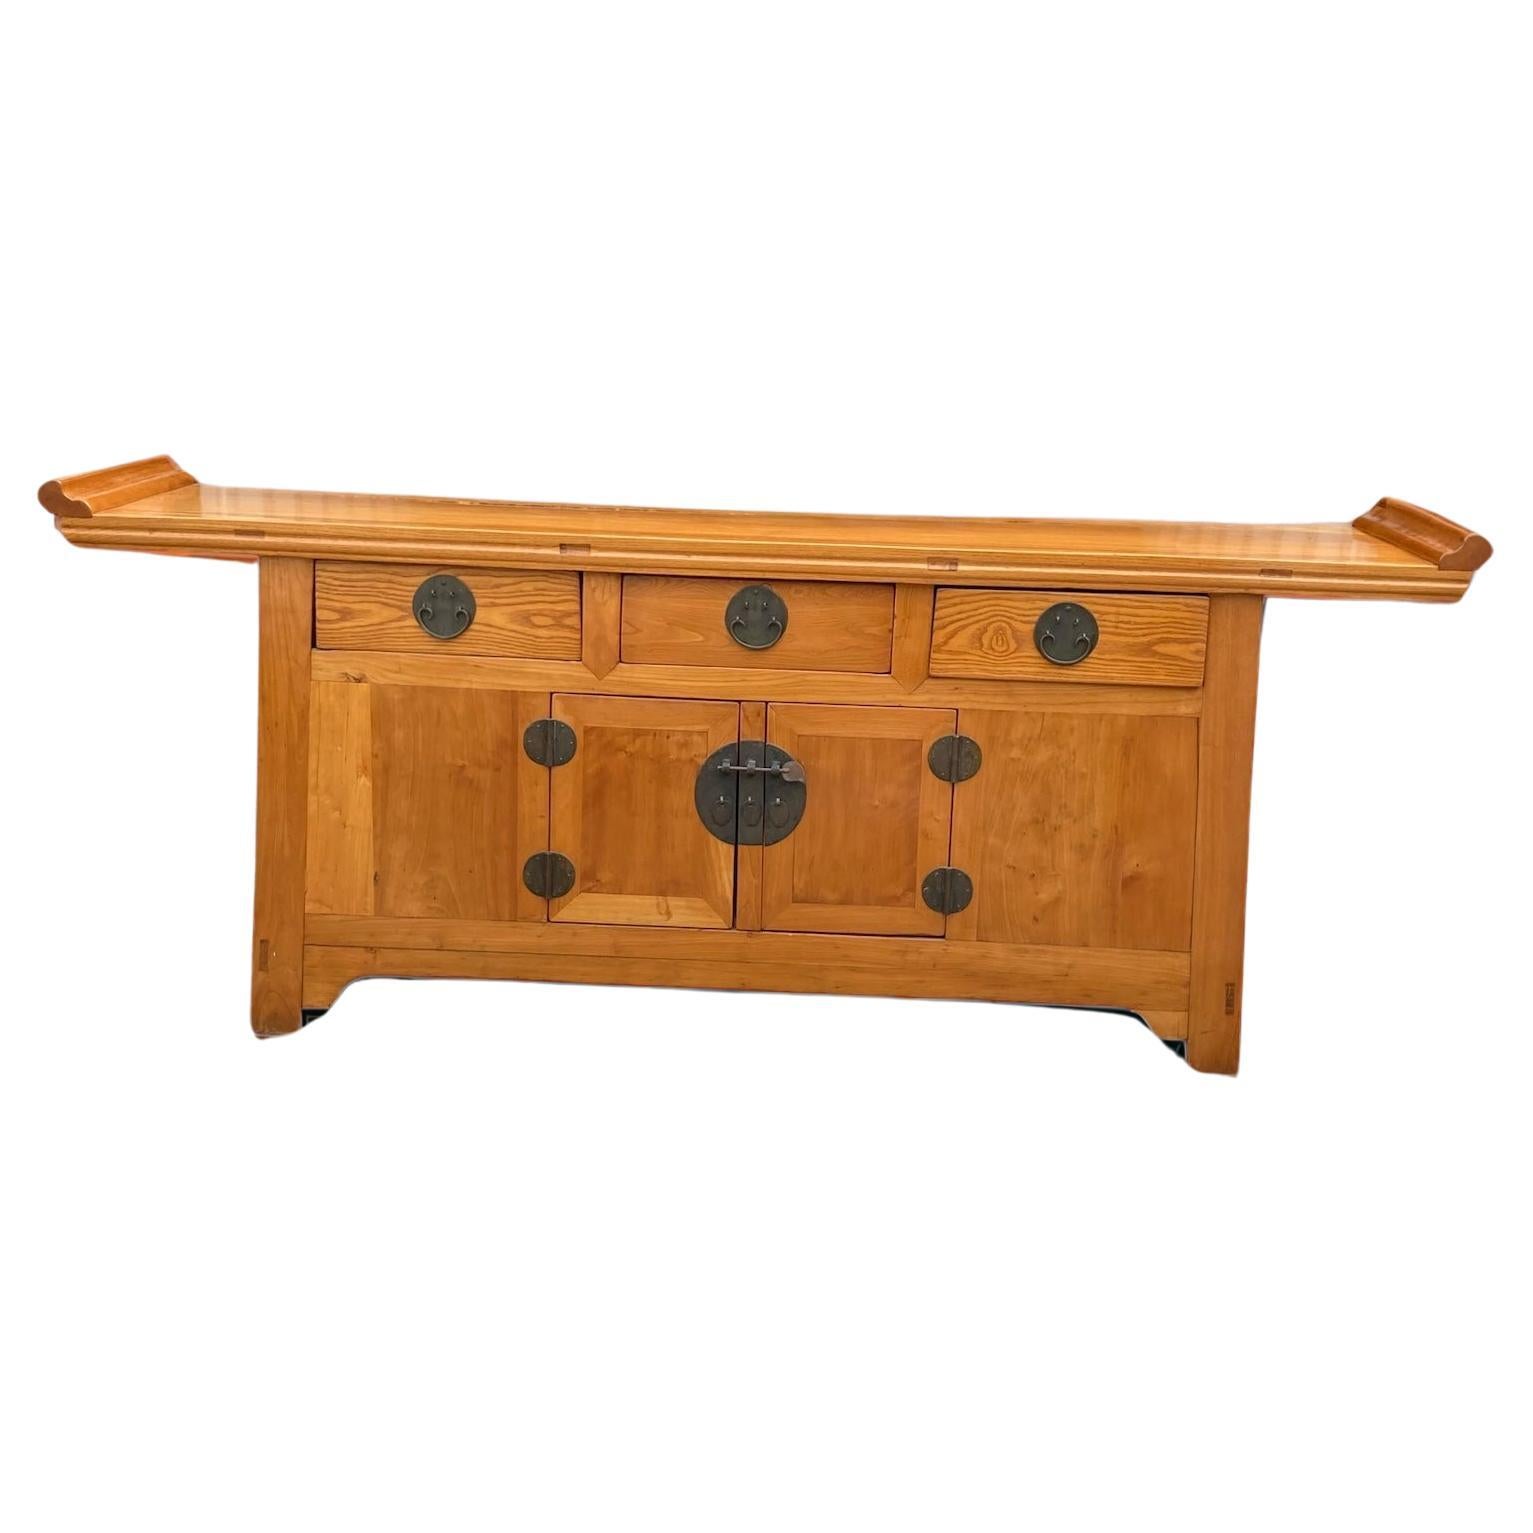 An Elmwood Chinoiserie style alter sideboard For Sale